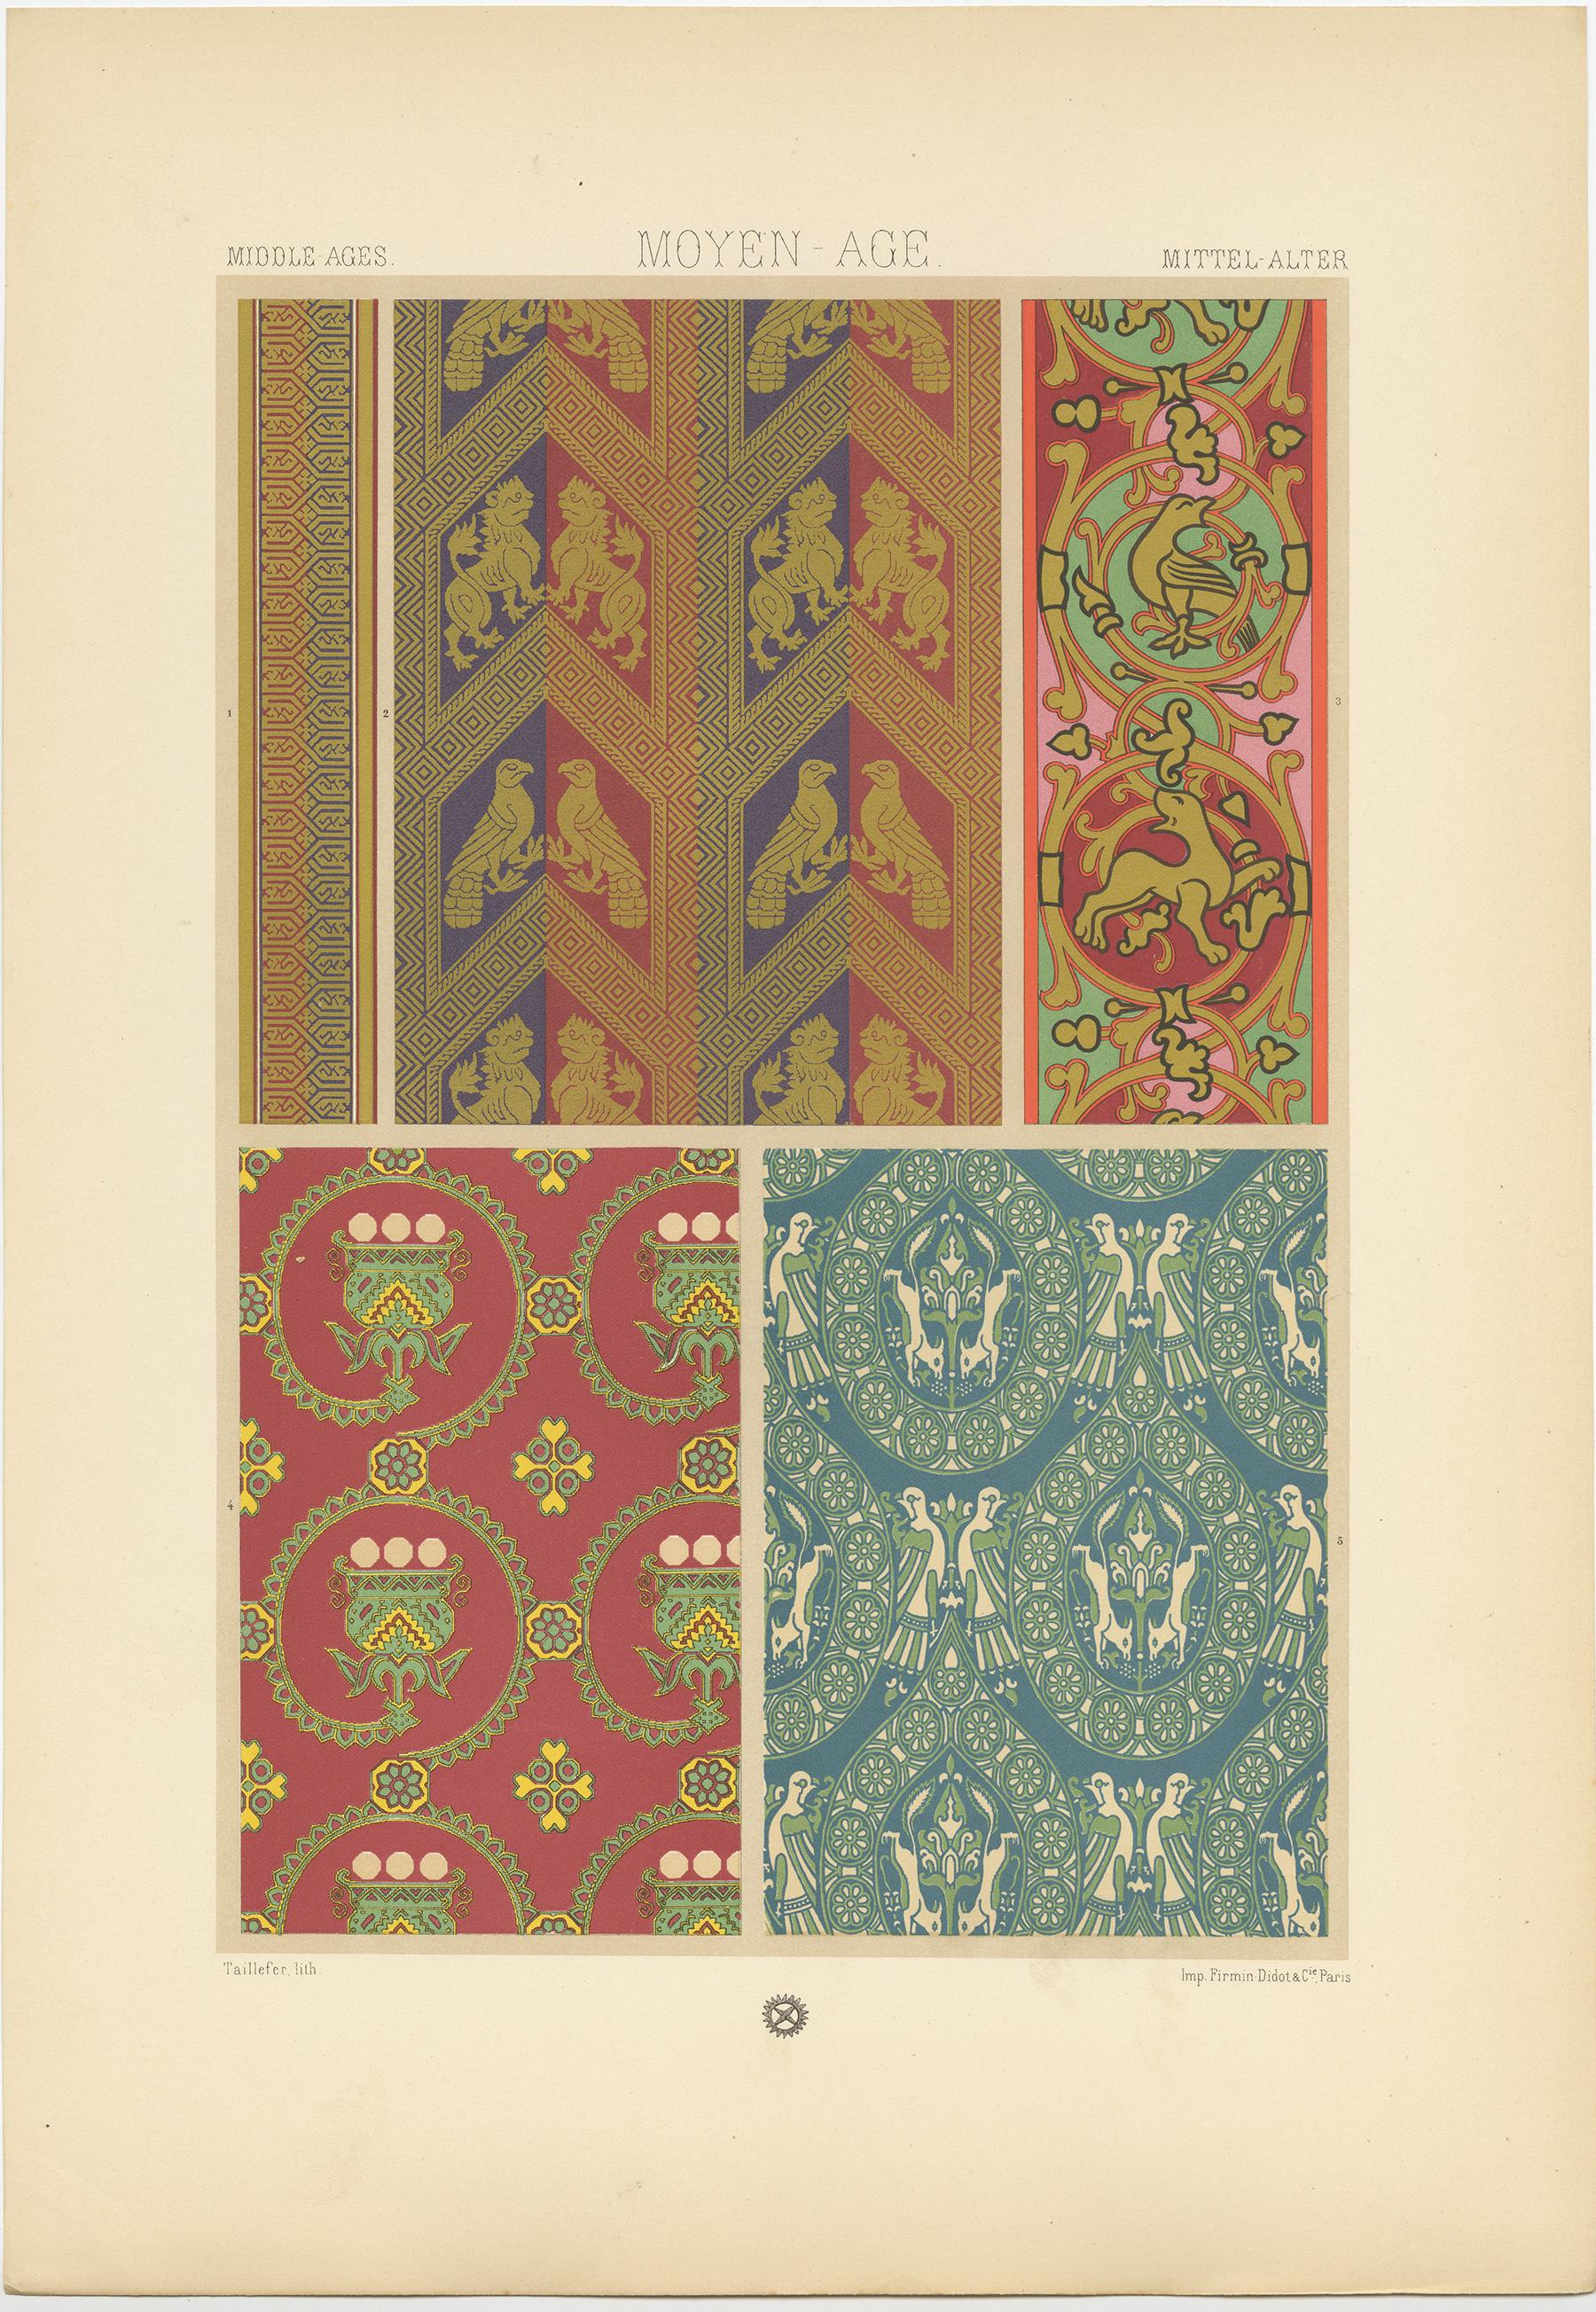 19th Century Pl. 53 Antique Print of Middle Ages Design from Textiles by Racinet, circa 1890 For Sale